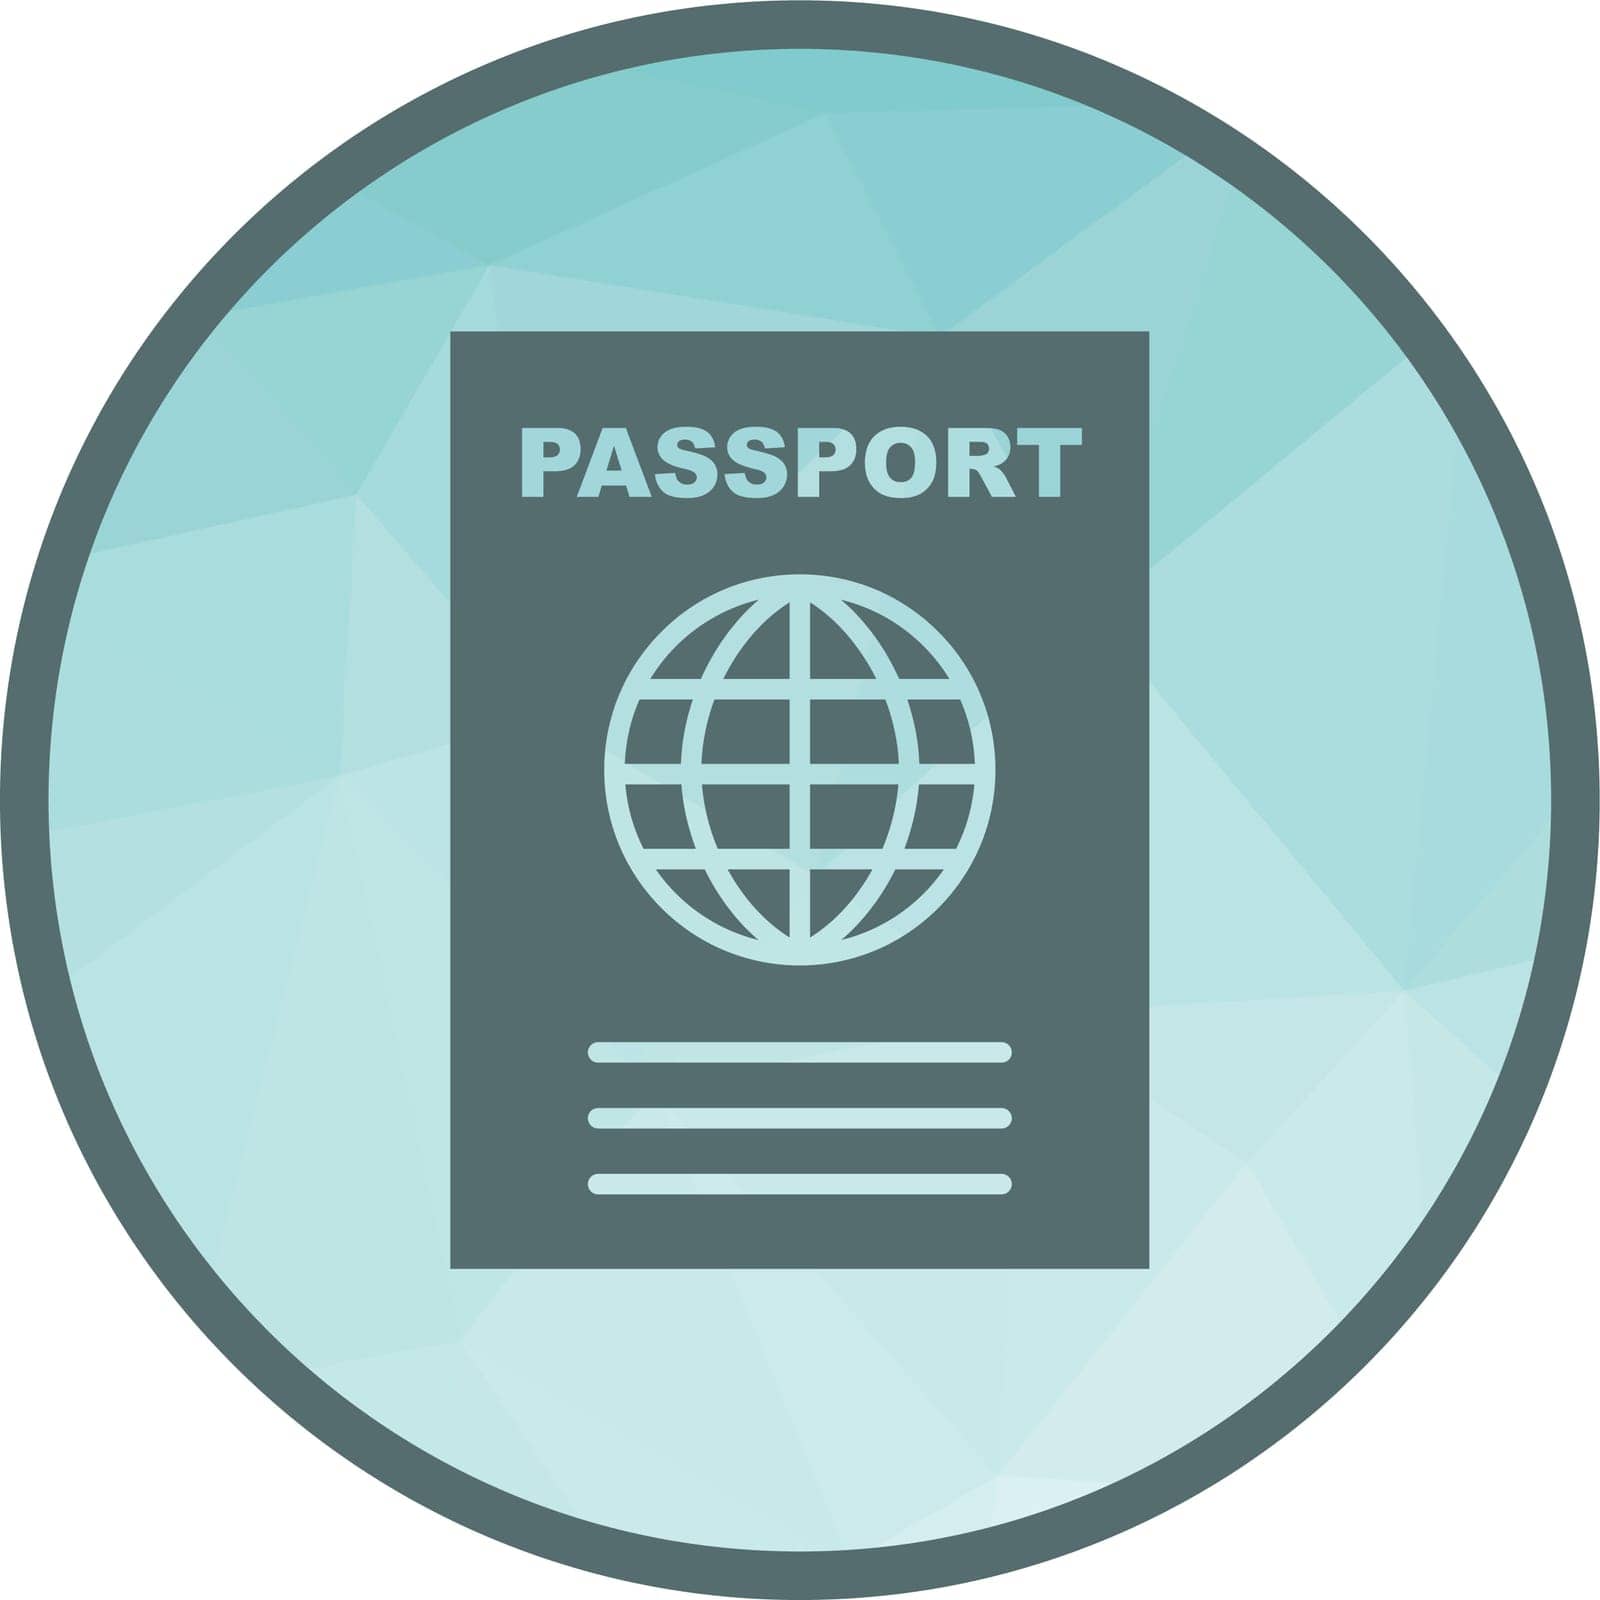 Passport icon vector image. Suitable for mobile application web application and print media.